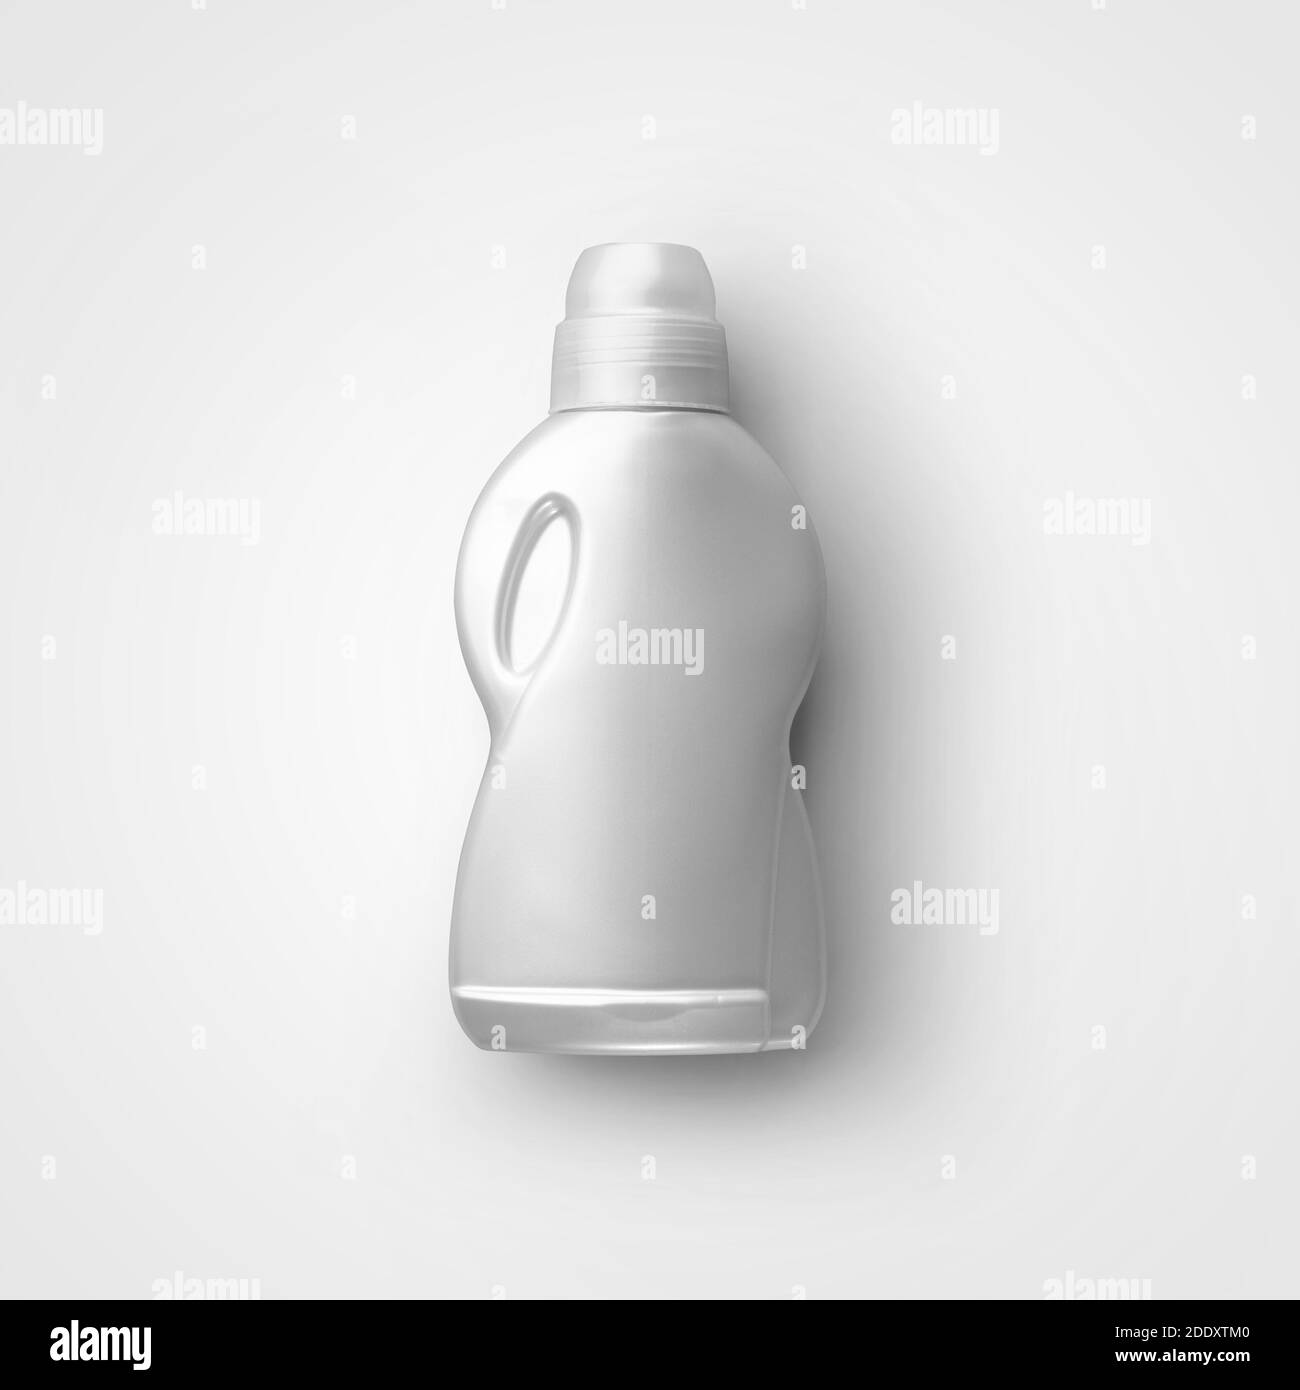 https://c8.alamy.com/comp/2DDXTM0/mockup-of-a-white-plastic-jar-with-washing-powder-gel-empty-glossy-cap-isolated-on-background-bottle-template-with-detergent-fabric-softener-cont-2DDXTM0.jpg